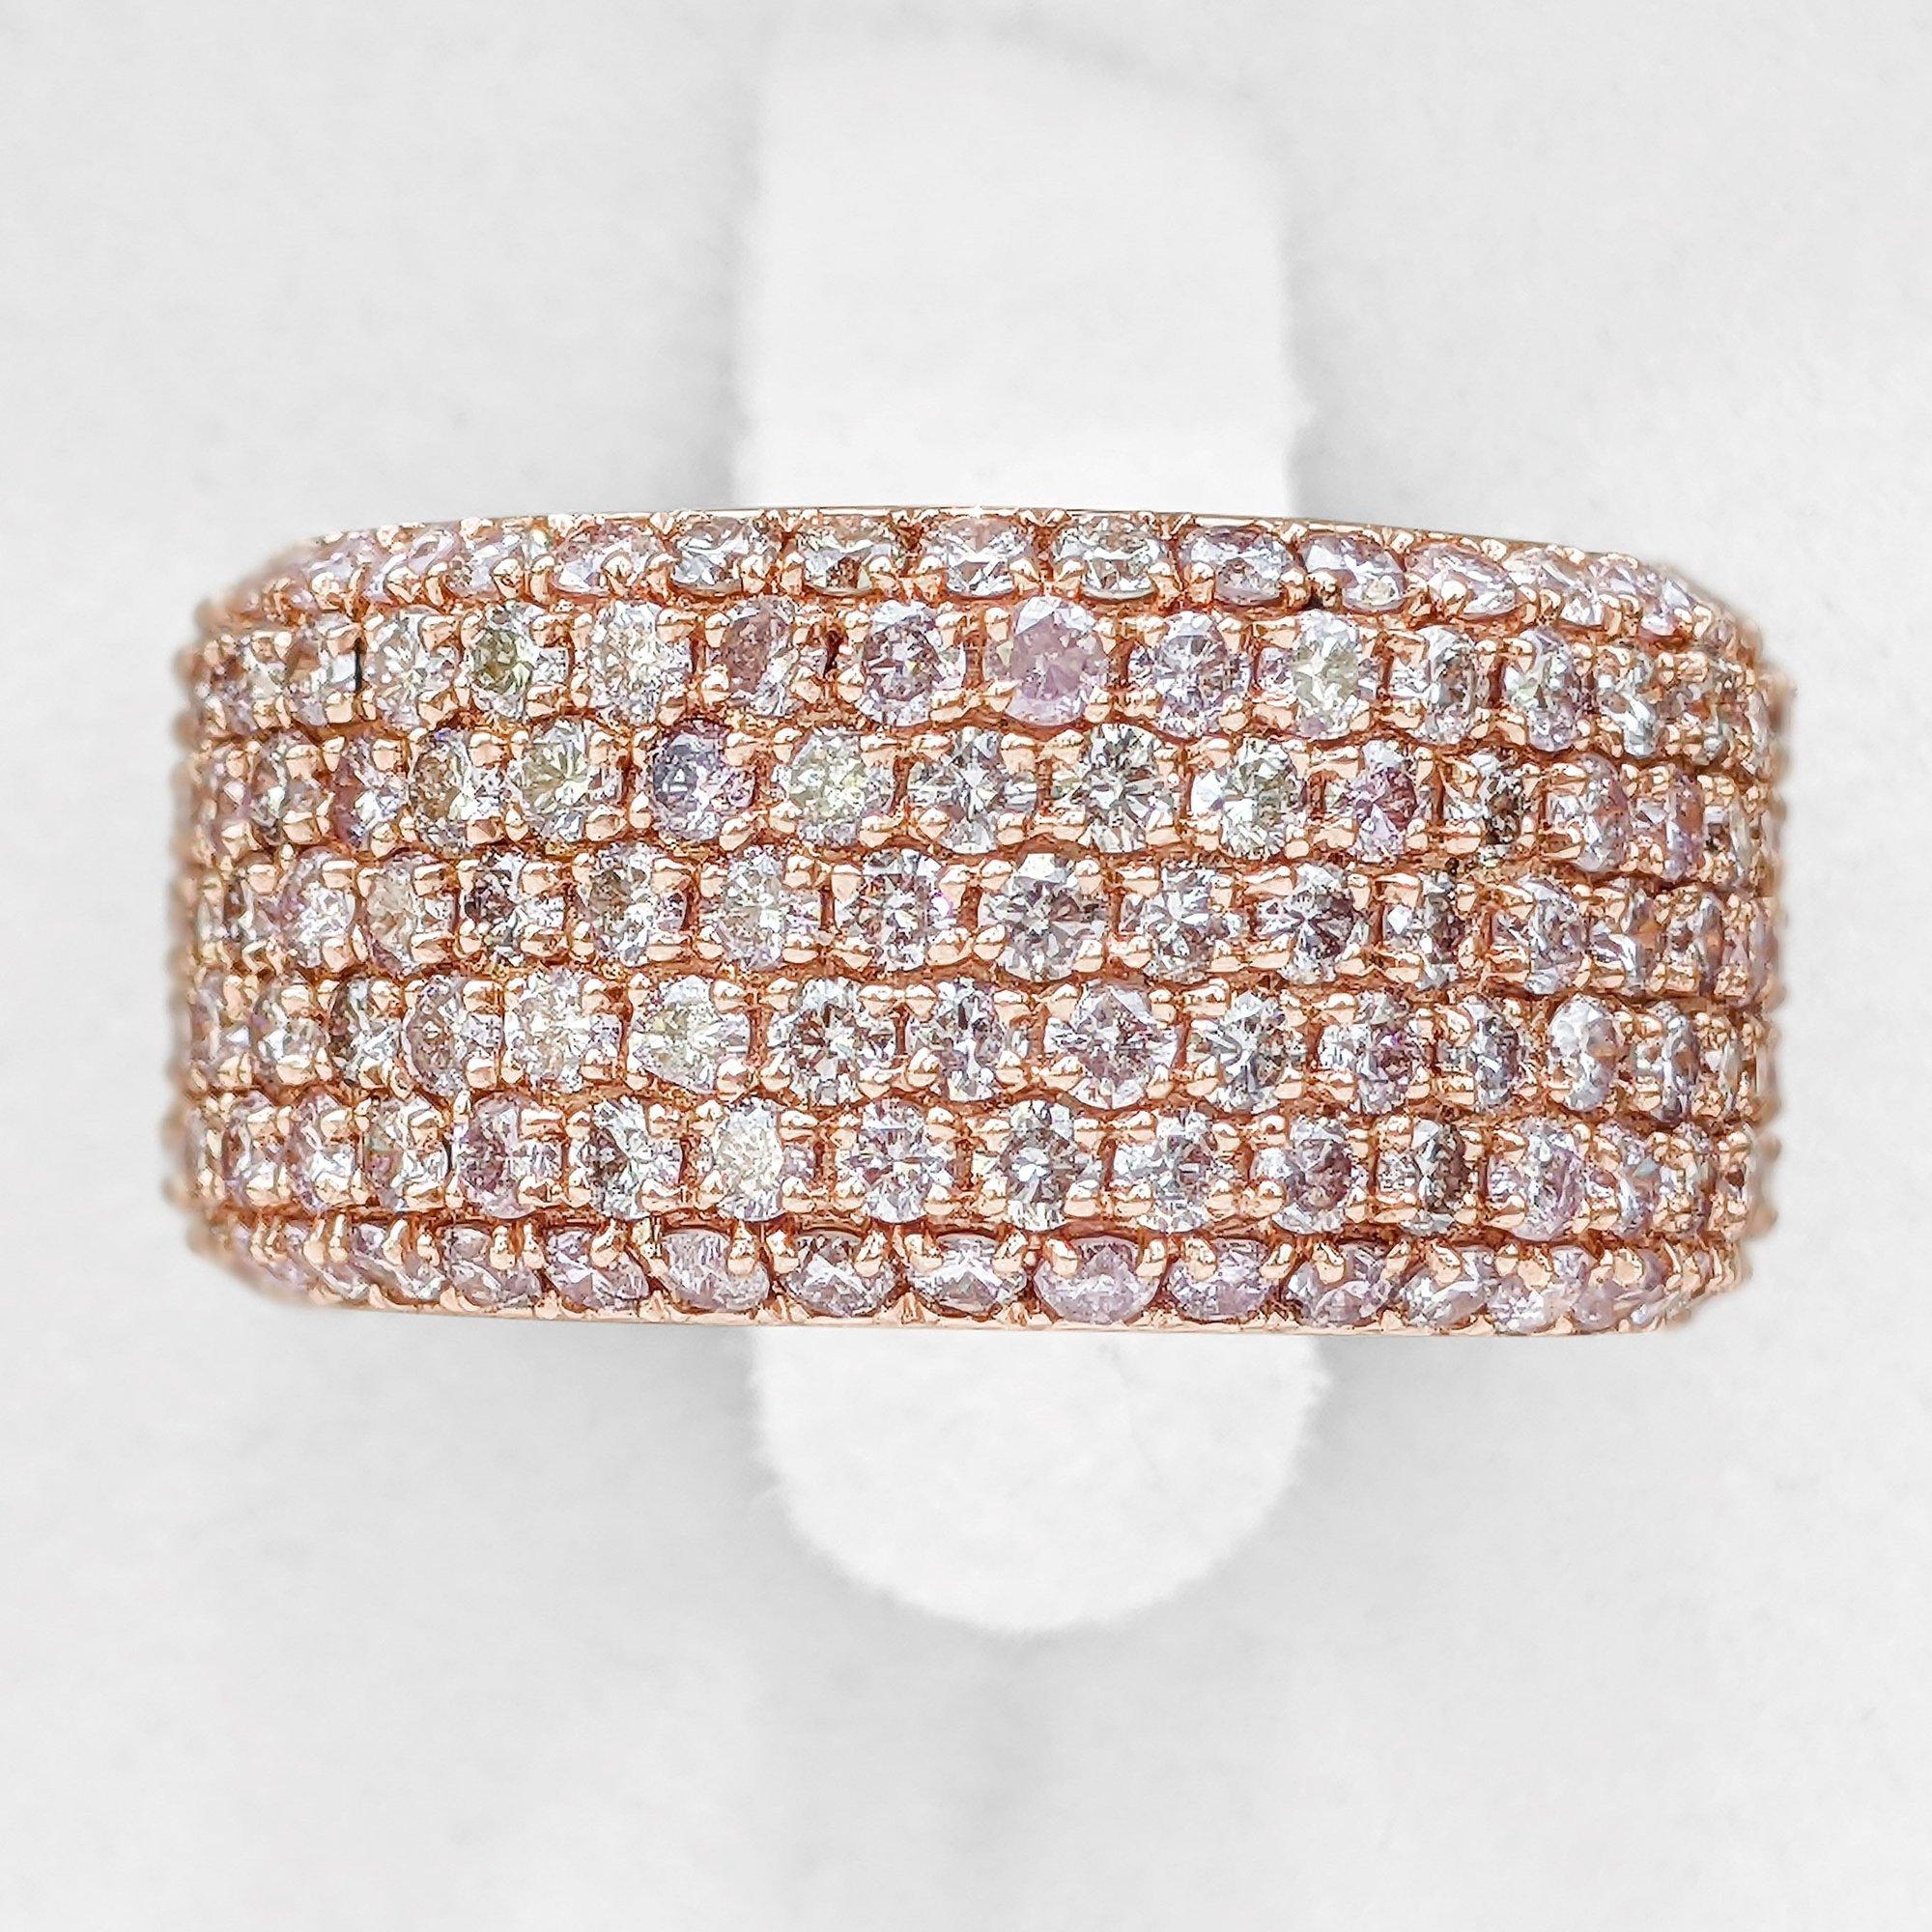 Women's NO RESERVE! 4.30 Carat Fancy Pink Diamonds Eternity Band Pink gold - Ring For Sale